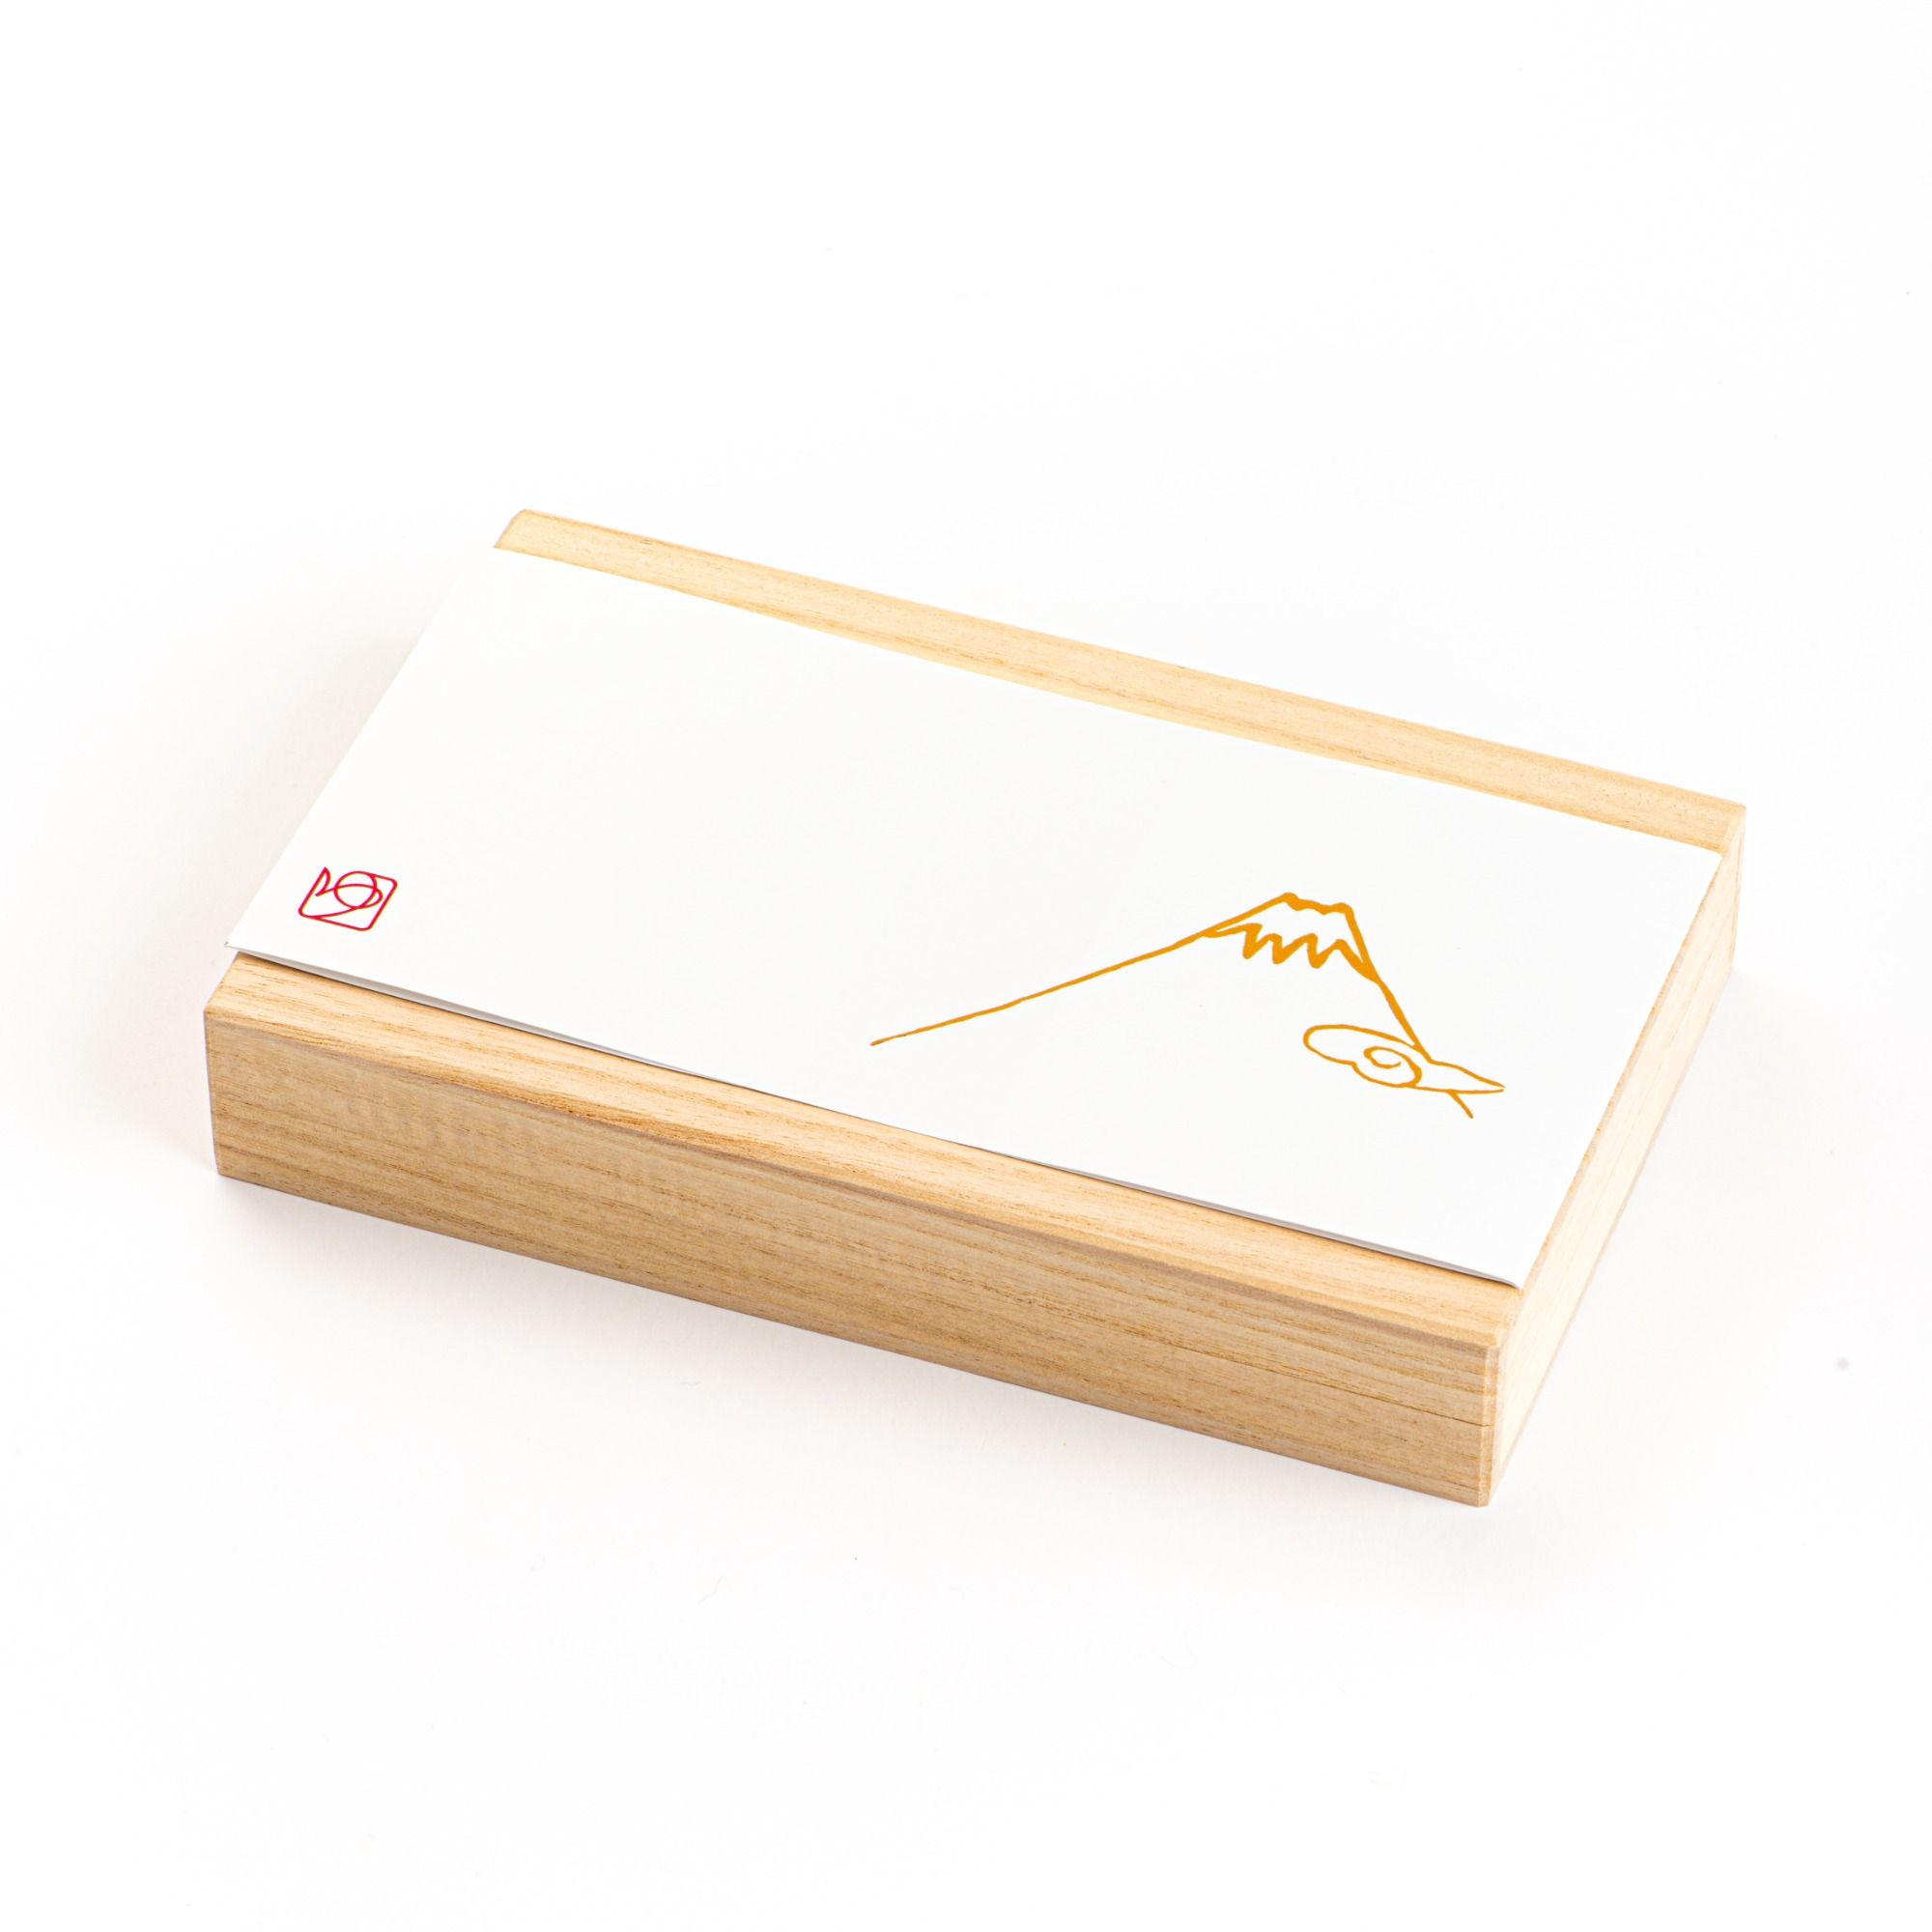 You You Ang Fuji Mountain Incense Gift Set-Fragrant Olive (Osmanthus) with Red Plate